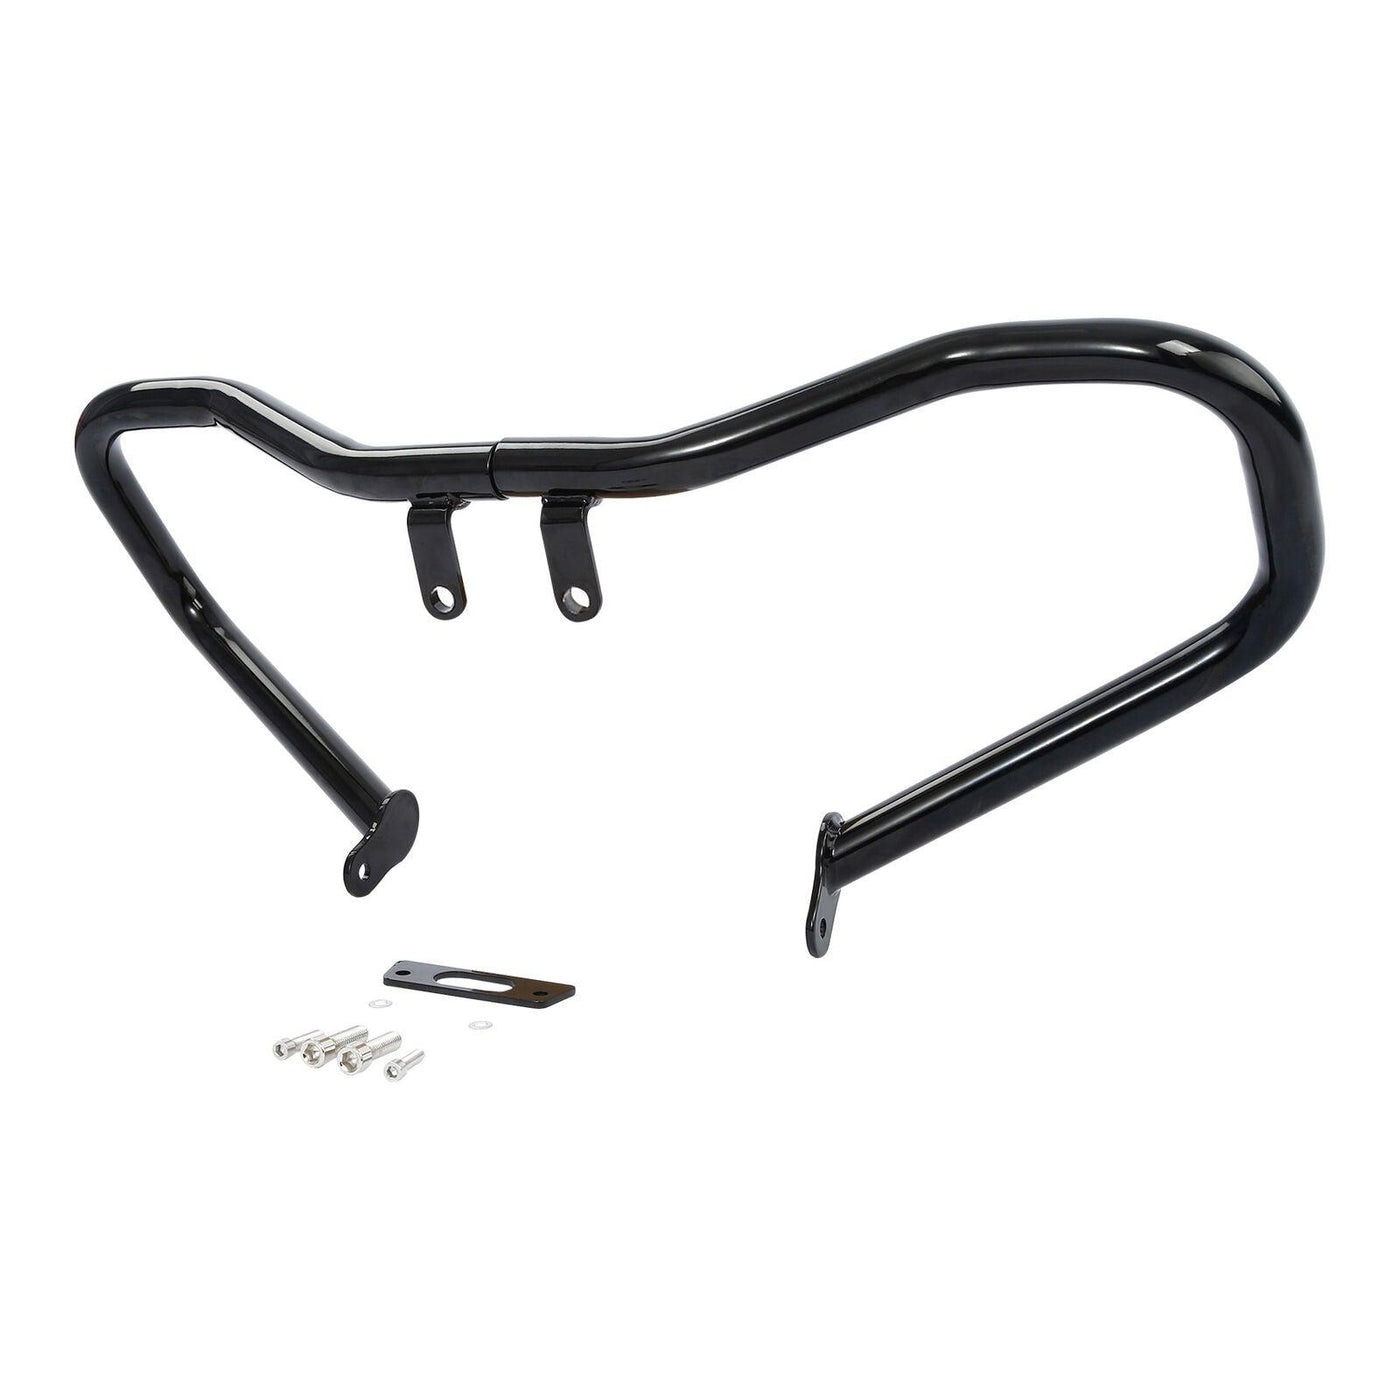 Chopped Engine Guard Crash Bar Fit For Harley Street Glide FLHX 14-22 Road King - Moto Life Products